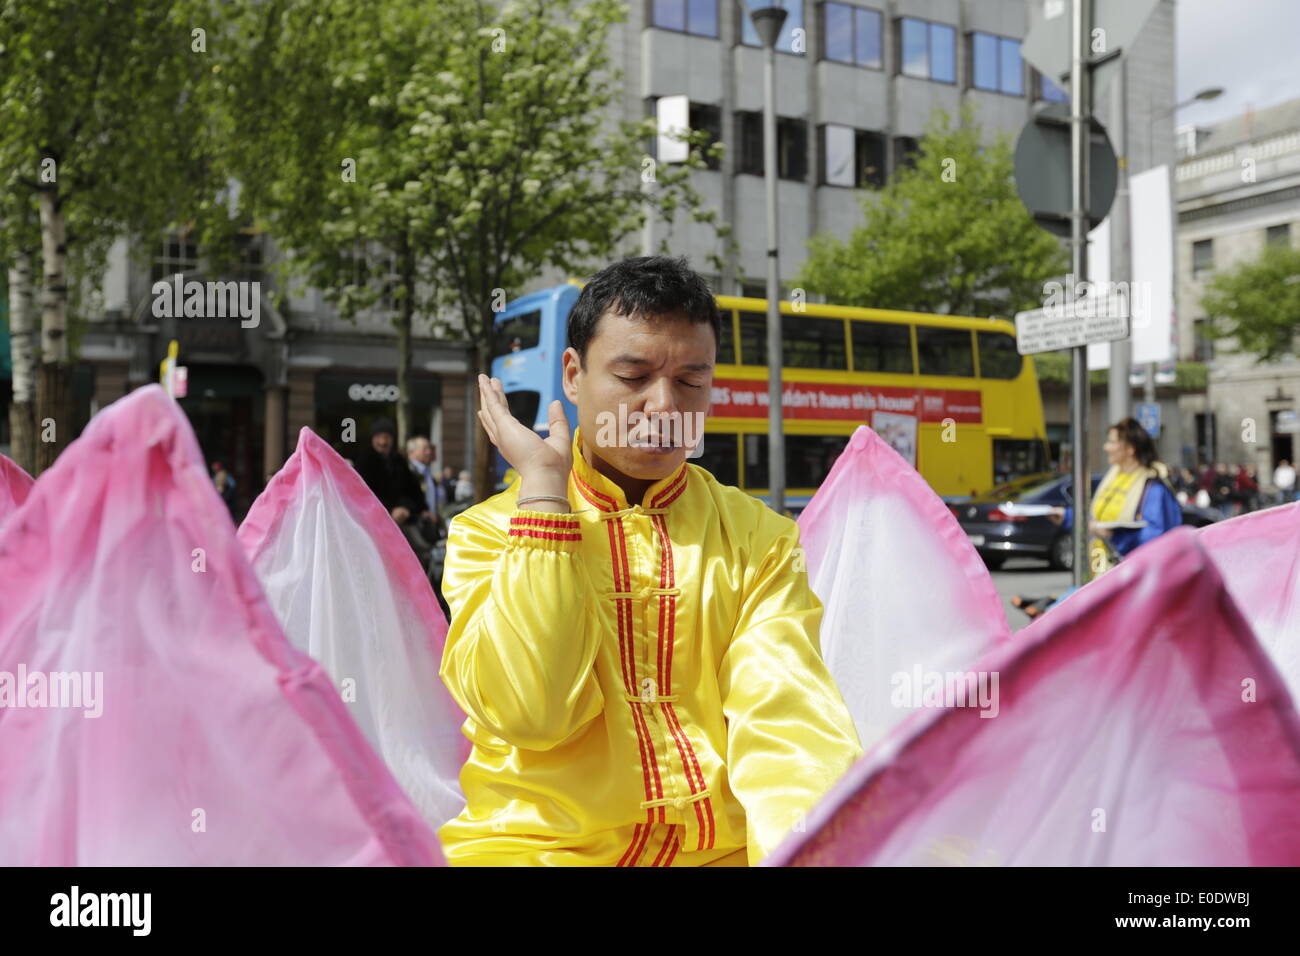 DUBLIN, IRELAND - MAY 10: A Falun Dafa practitioner sits in an large artificial flower, practicing Falun Dafa meditations during the procession to celebrate World Falun Dafa Day in Dublin. Falun Dafa is calling for an end of the persecution of Falun Dafa by the Chinese government. (Photo by Michael Debets / Pacific Press) Stock Photo